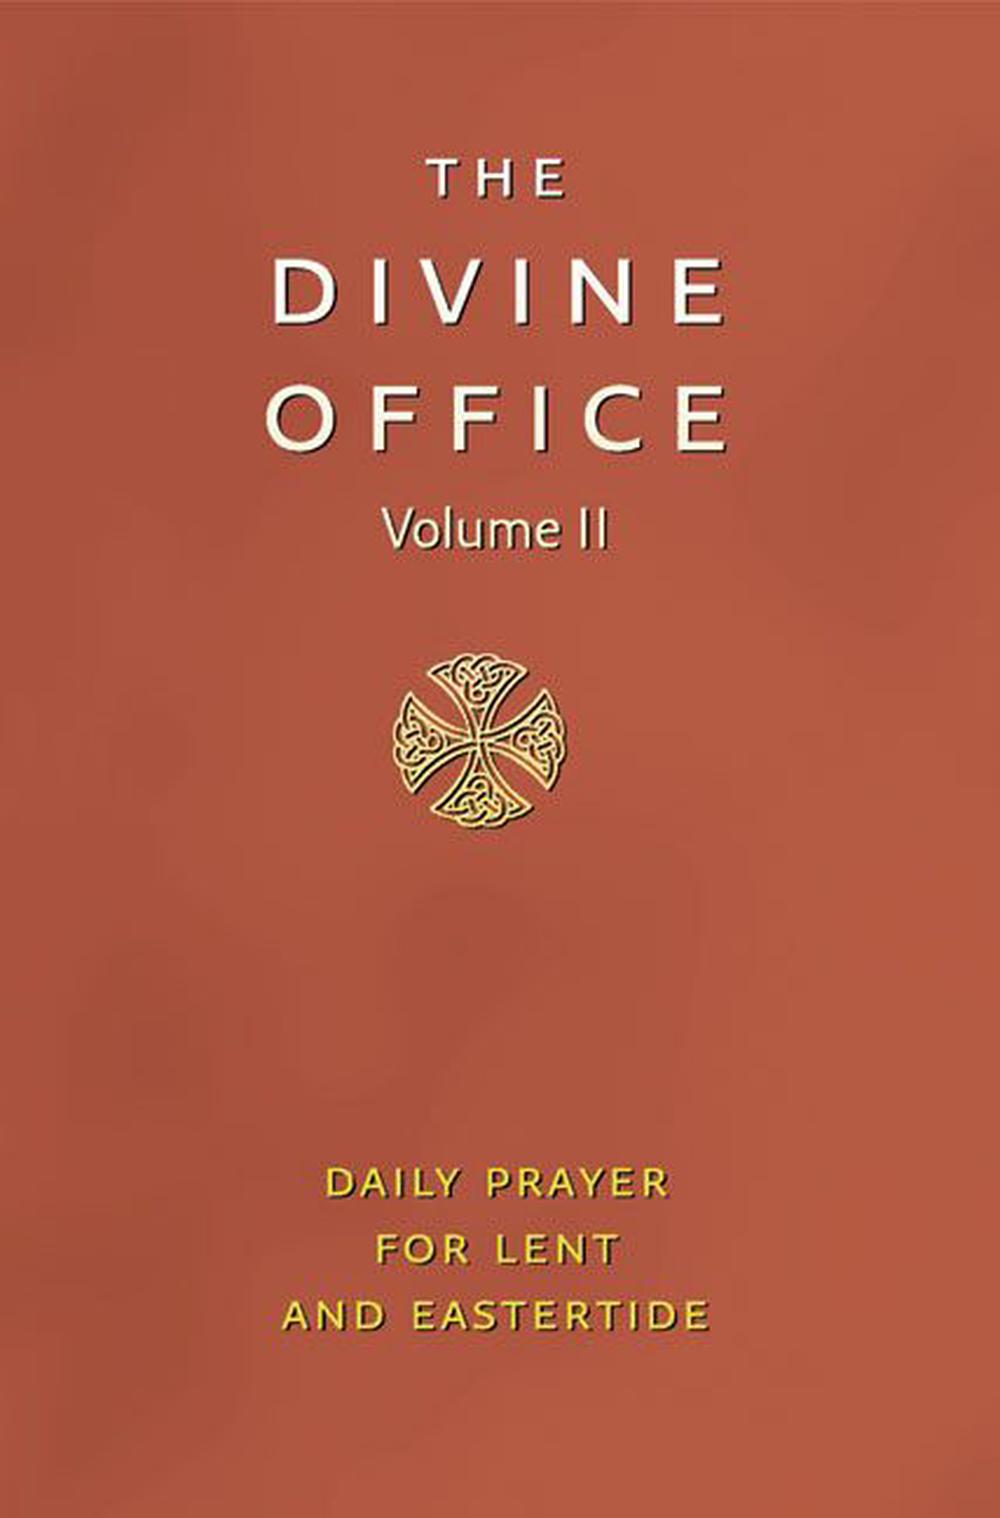 liturgy of the hours divine office